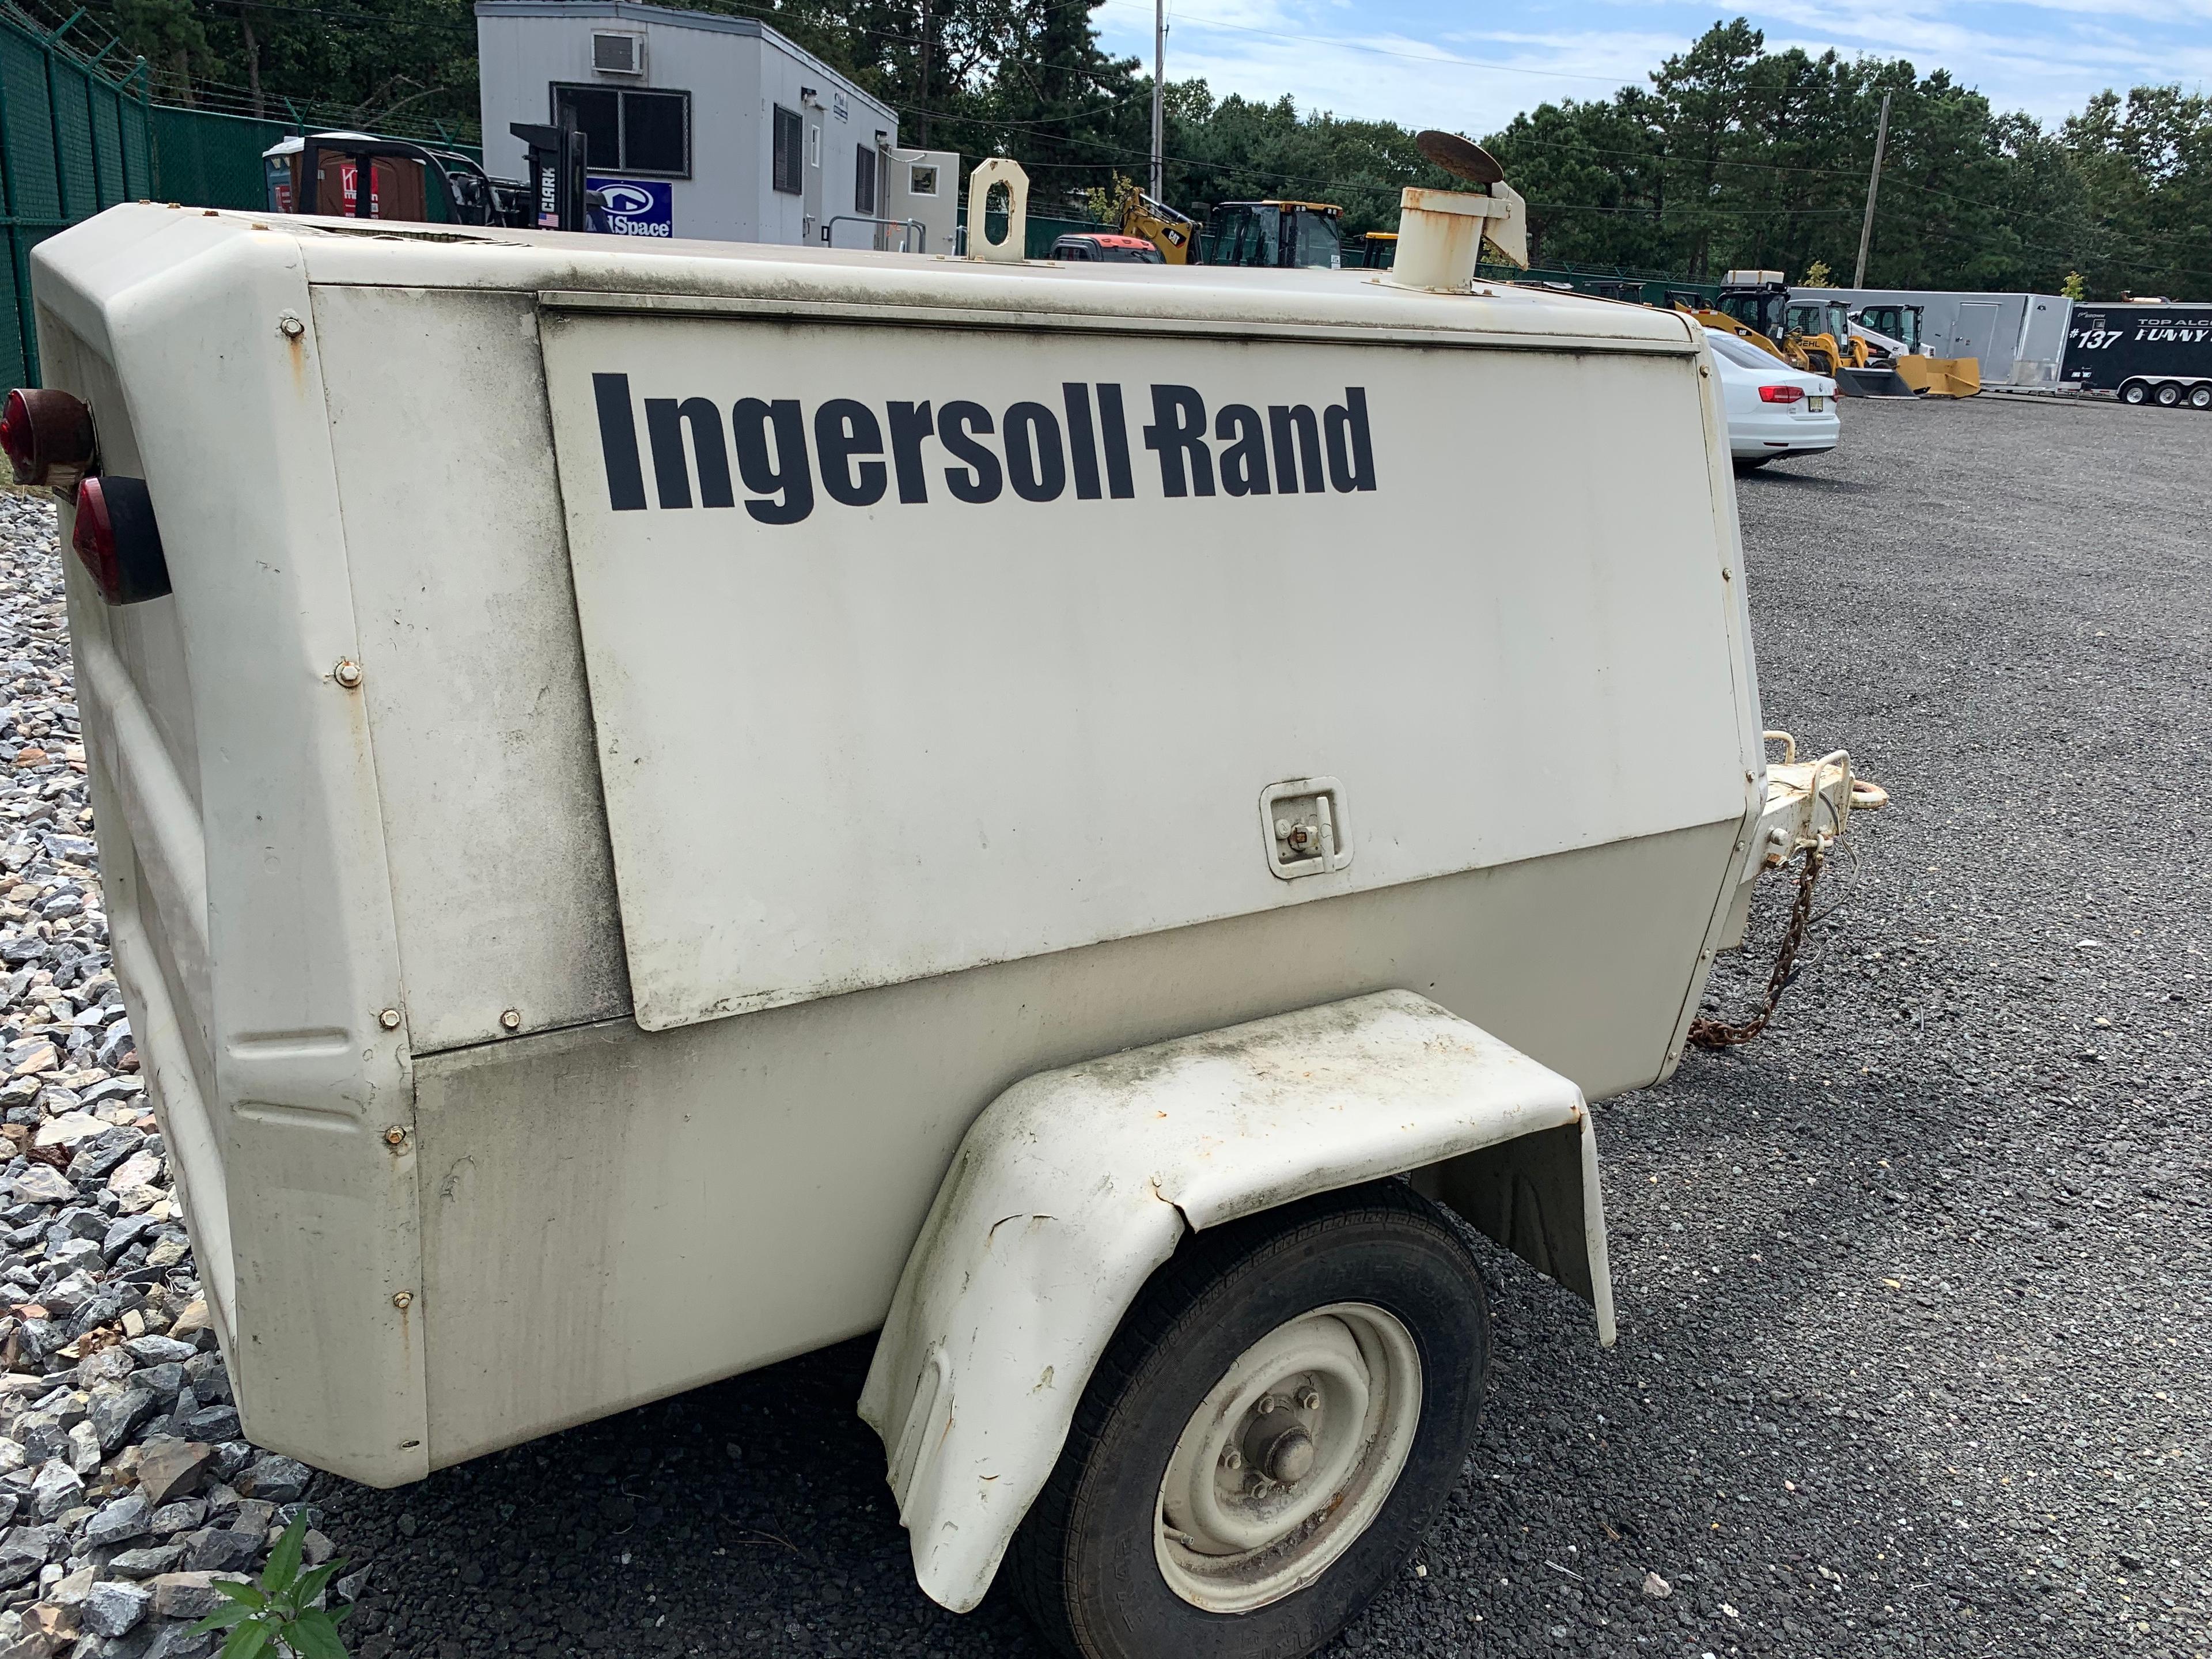 Ingersoll Rand tow behind compressor